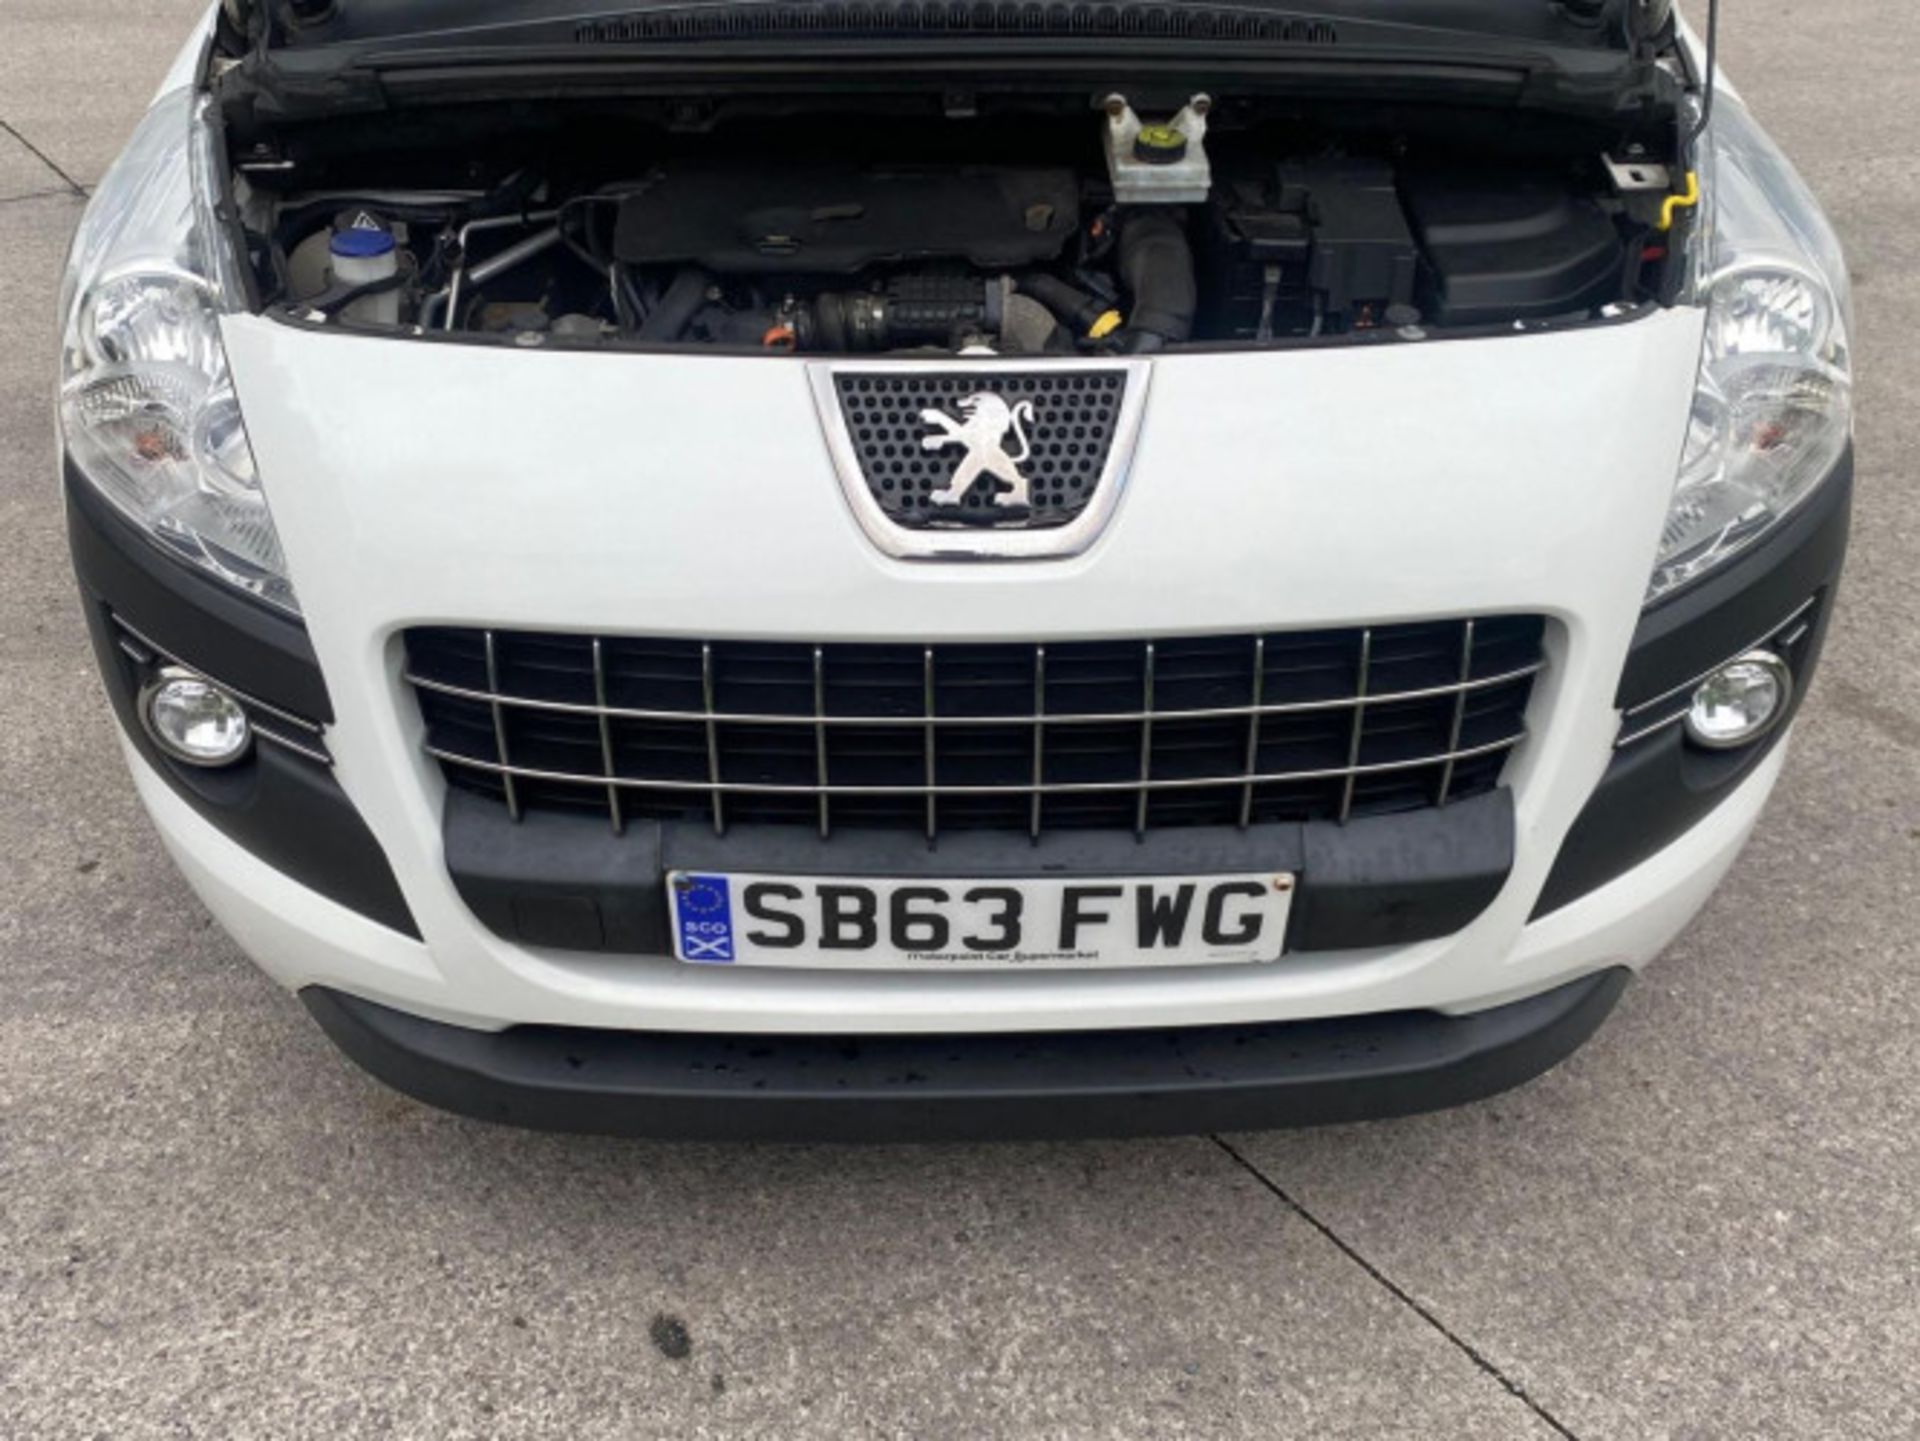 2013 PEUGEOT 3008 1.6 HDI ACTIVE EURO 5 5DR >>--NO VAT ON HAMMER--<< - Image 63 of 69